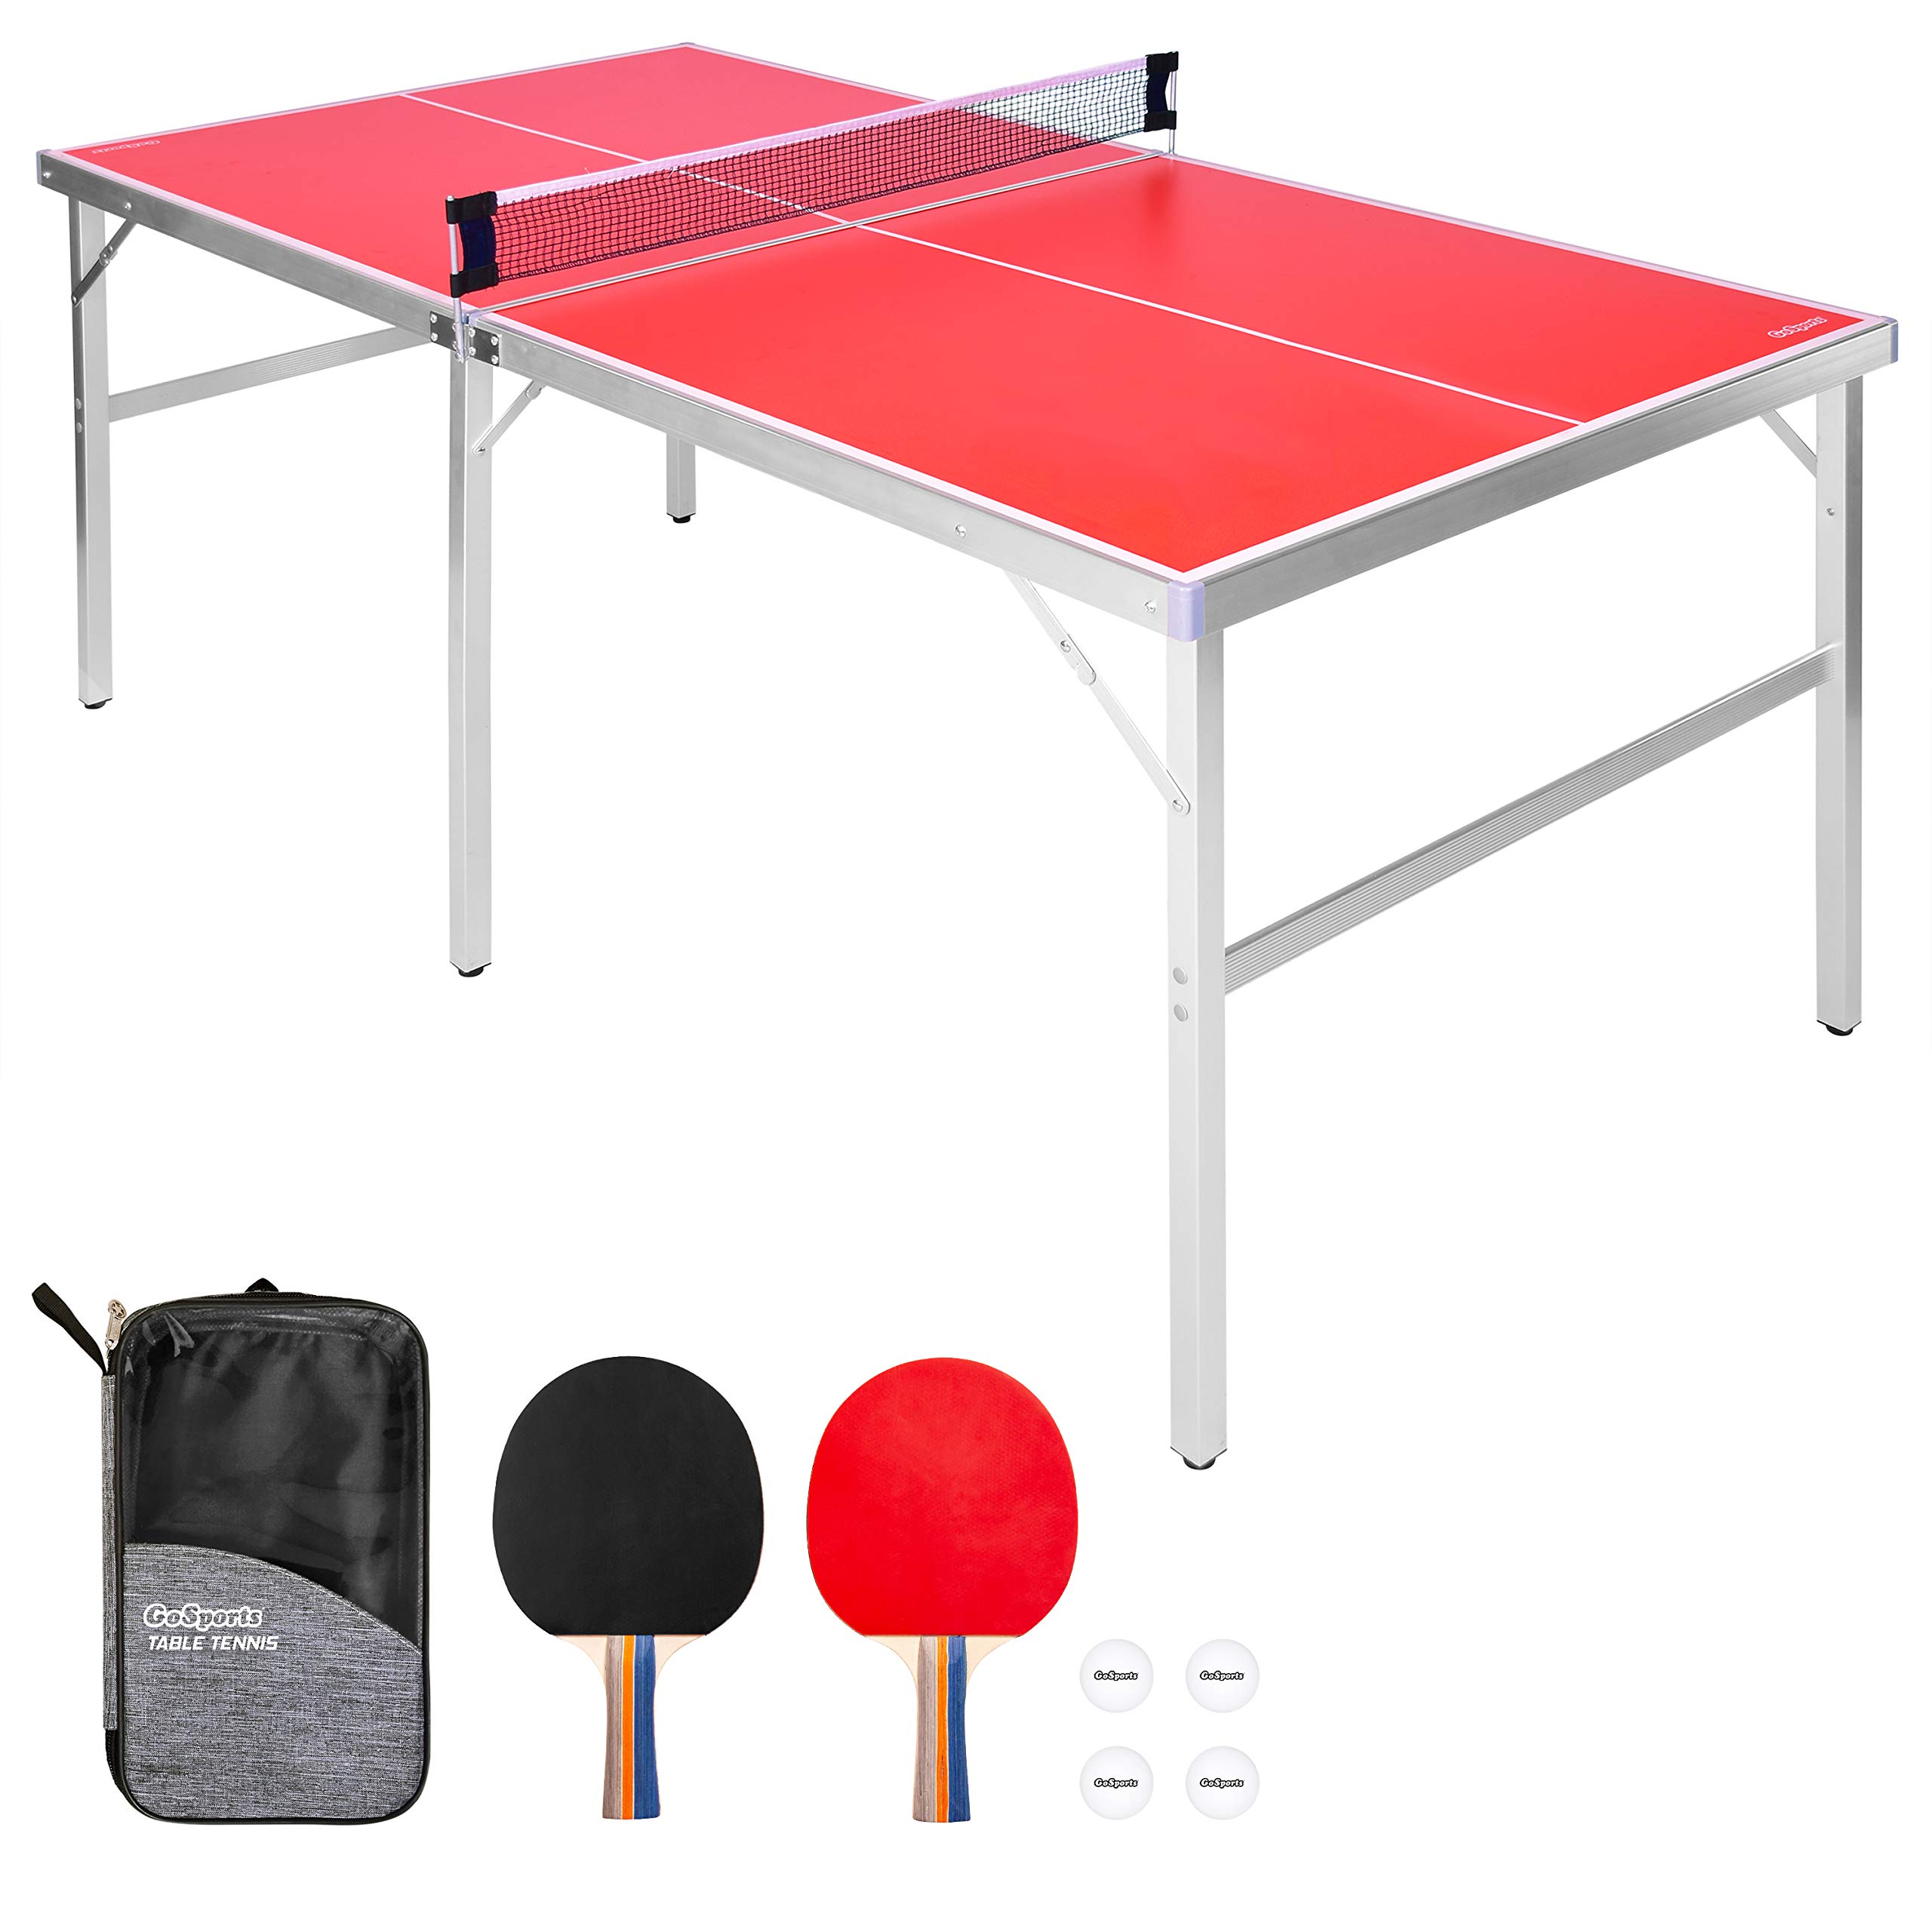 GoSports Mid-Size Table Tennis Game Set - Indoor/Outdoor Portable Table Tennis Game with Net, 2 Table Tennis Paddles and 4 Balls Red Table